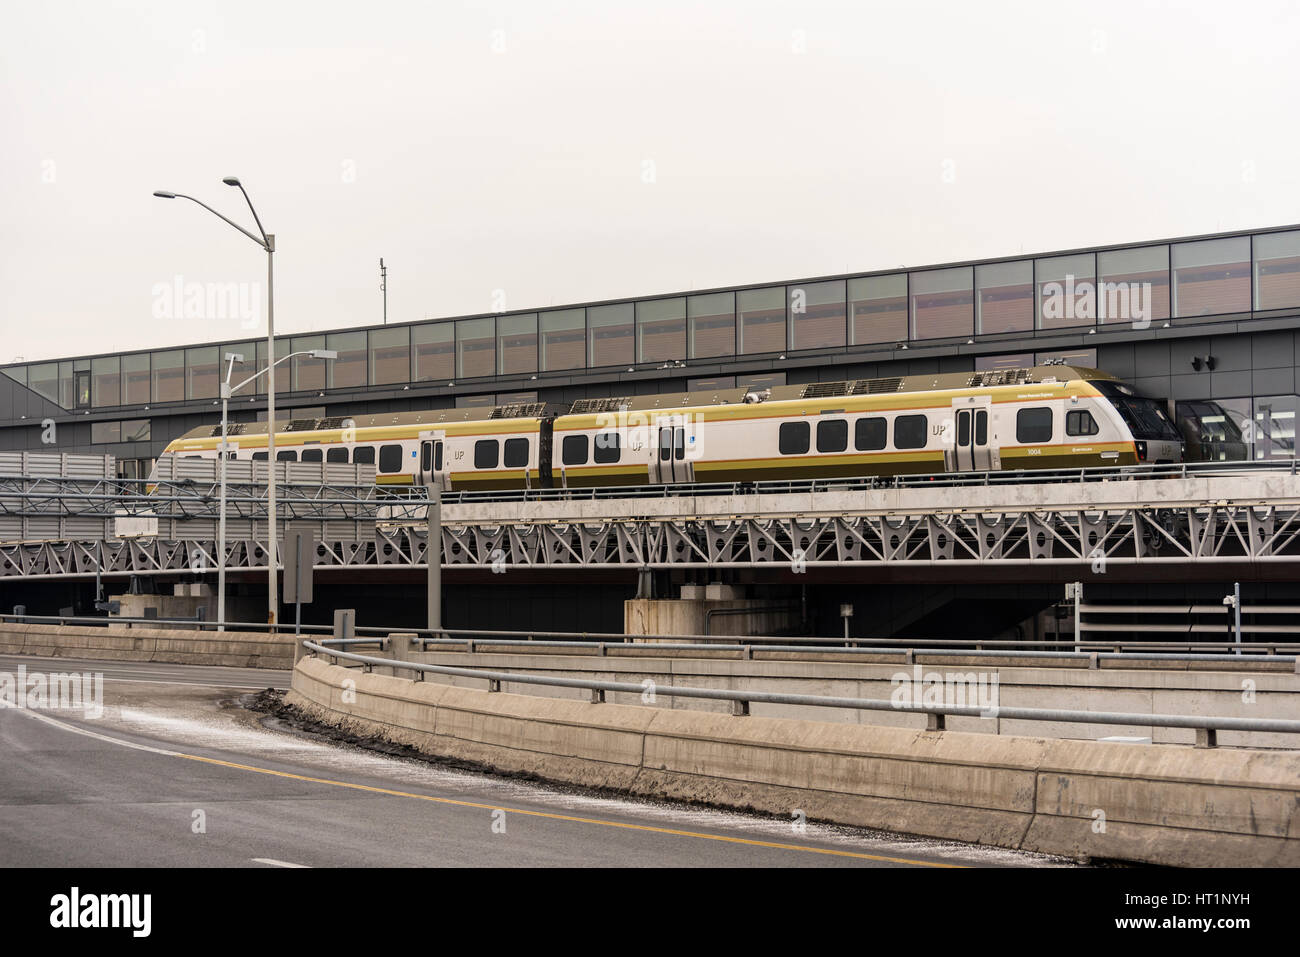 A Union Pearson or UP train parked at the Toronto Pearson International  Airport station. Stock Photo